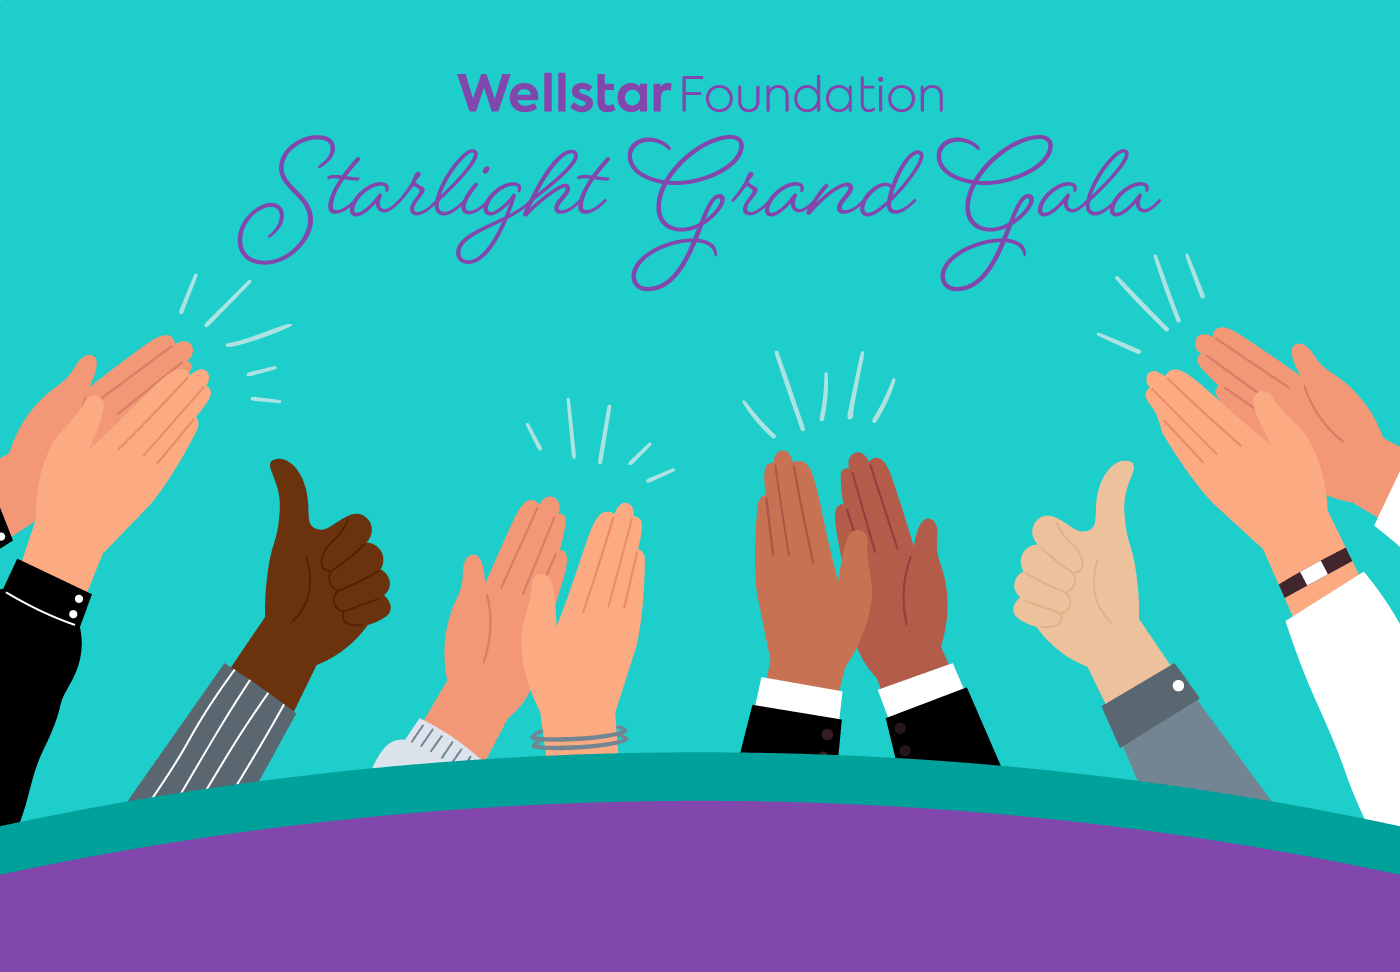 Illustration of hands clapping and giving thumbs up. Text reads "Wellstar Foundation Starlight Grand Gala"